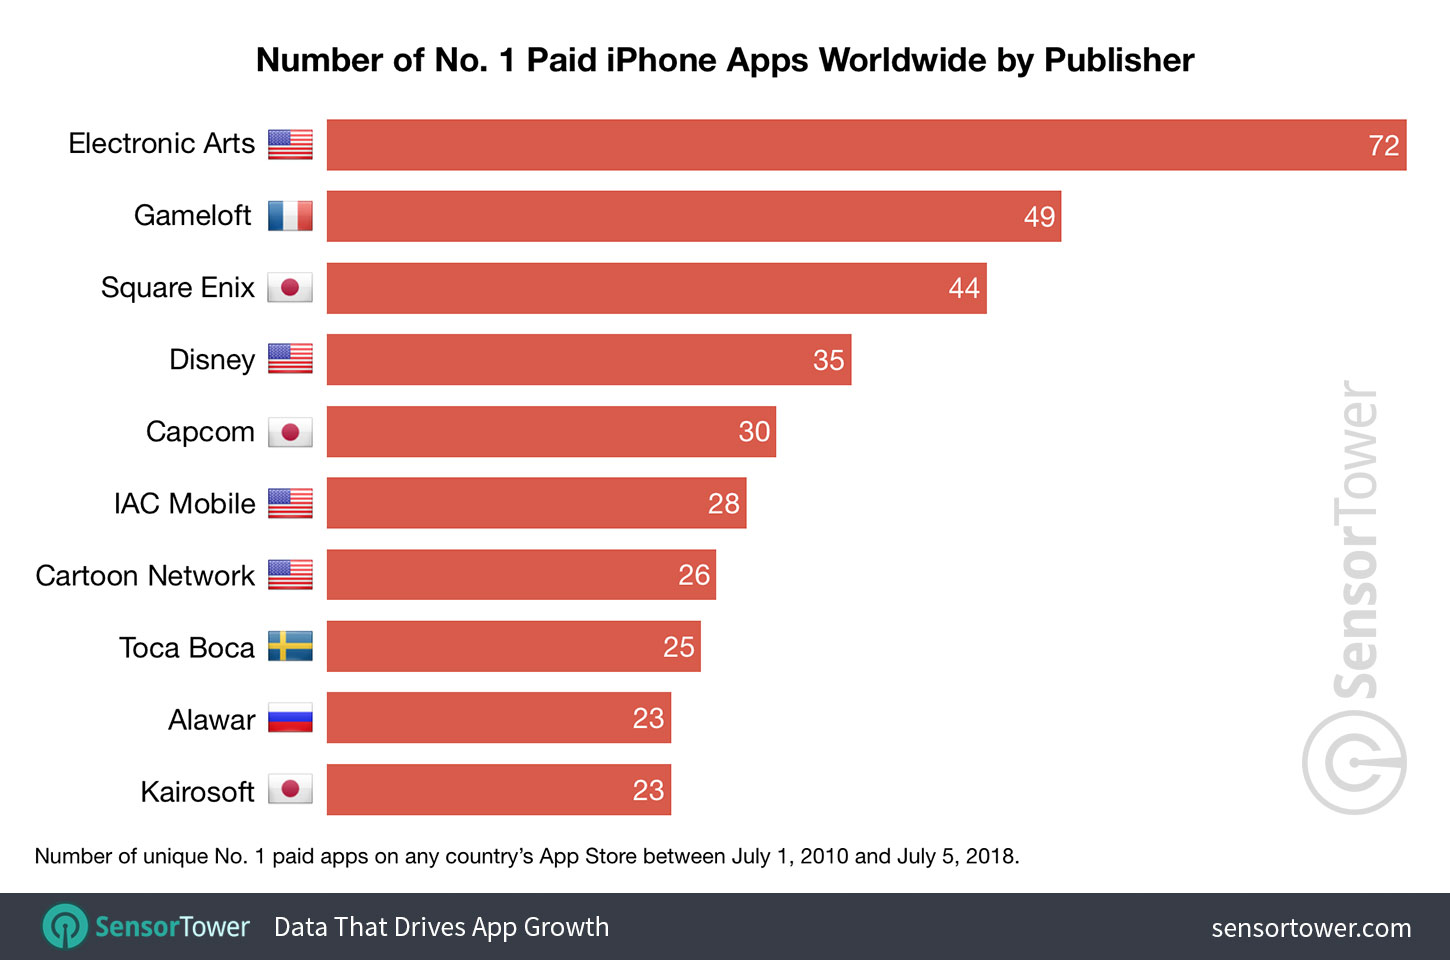 These Are the App Store's Most Popular Publishers by No. 1 Apps